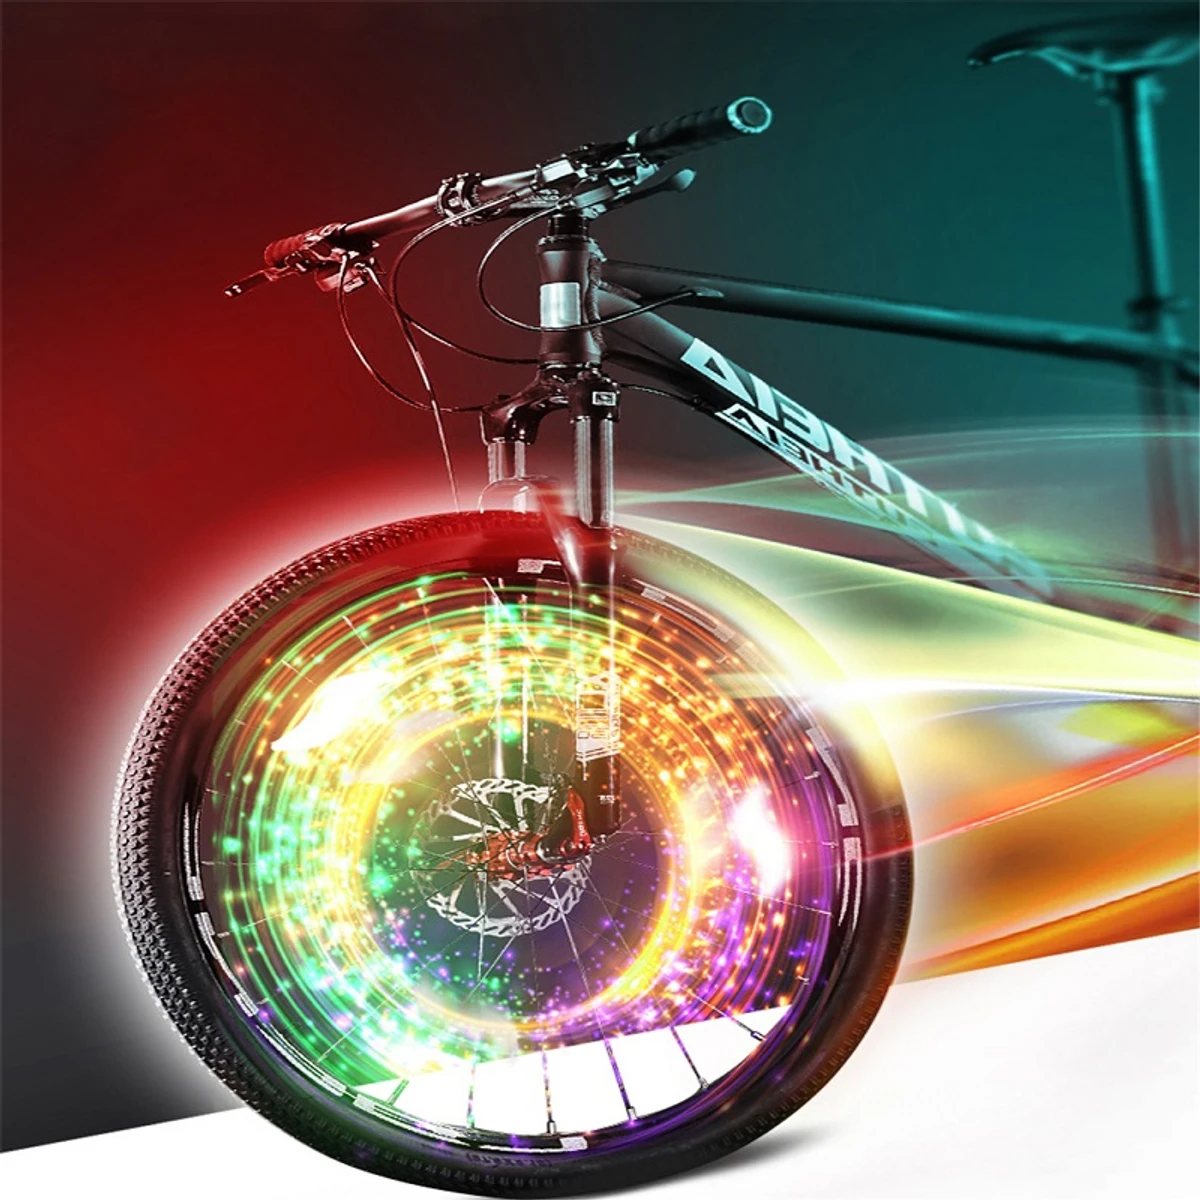 Bike Wheel Light Waterproof Bicycle Spoke Light Safety Tire Light 30 Different Patterns Change Without Battery Bike Accessories